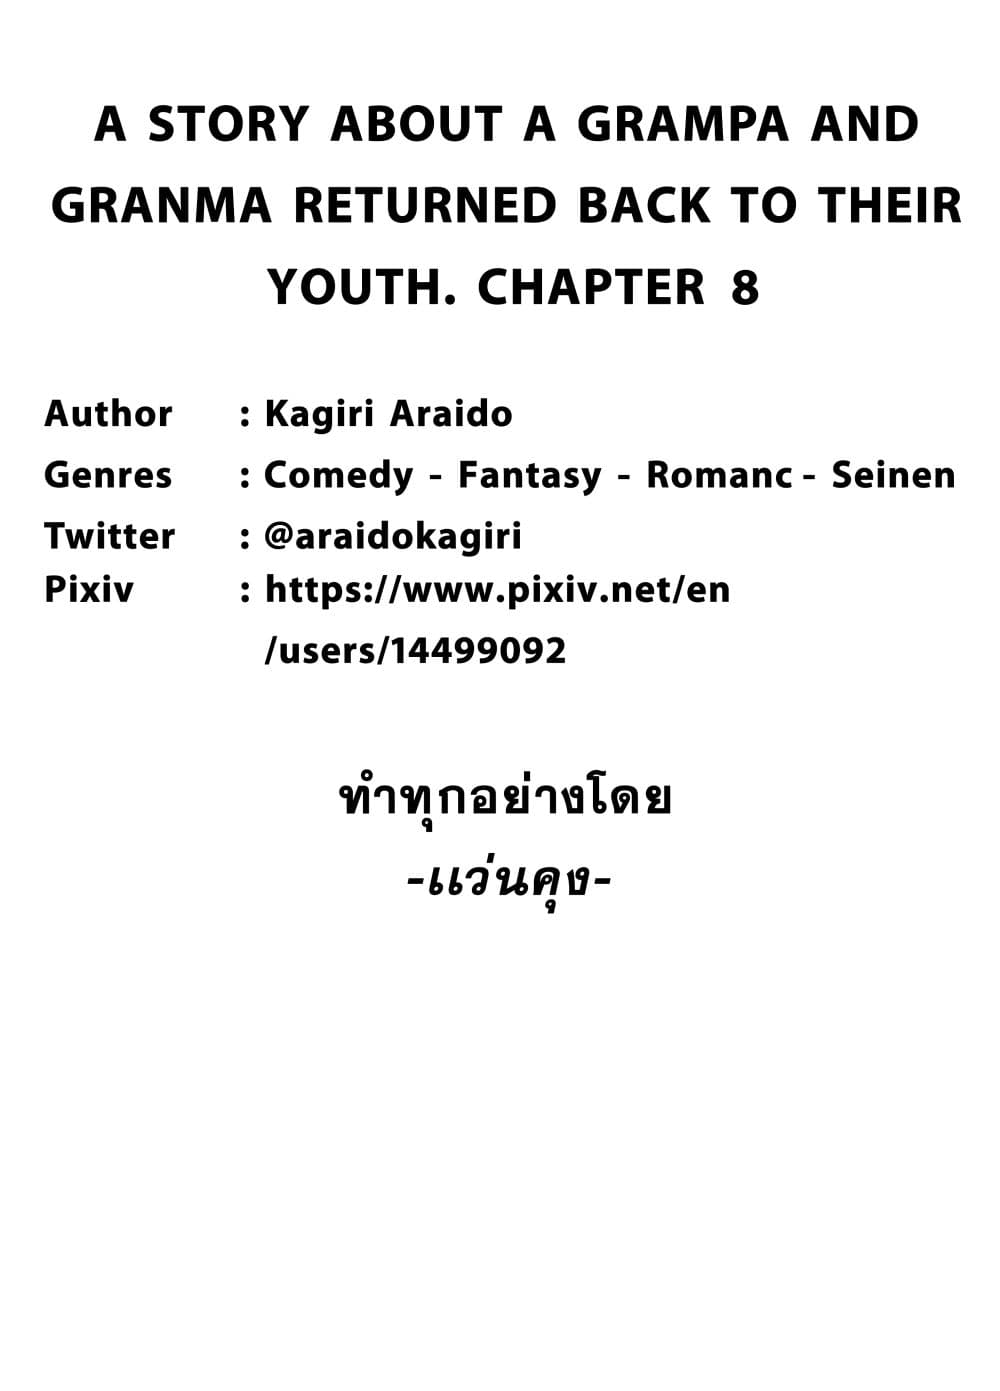 A Story About A Grampa and Granma Returned Back to their Youth คู่รักวัยดึกหวนคืนวัยหวาน 8-8